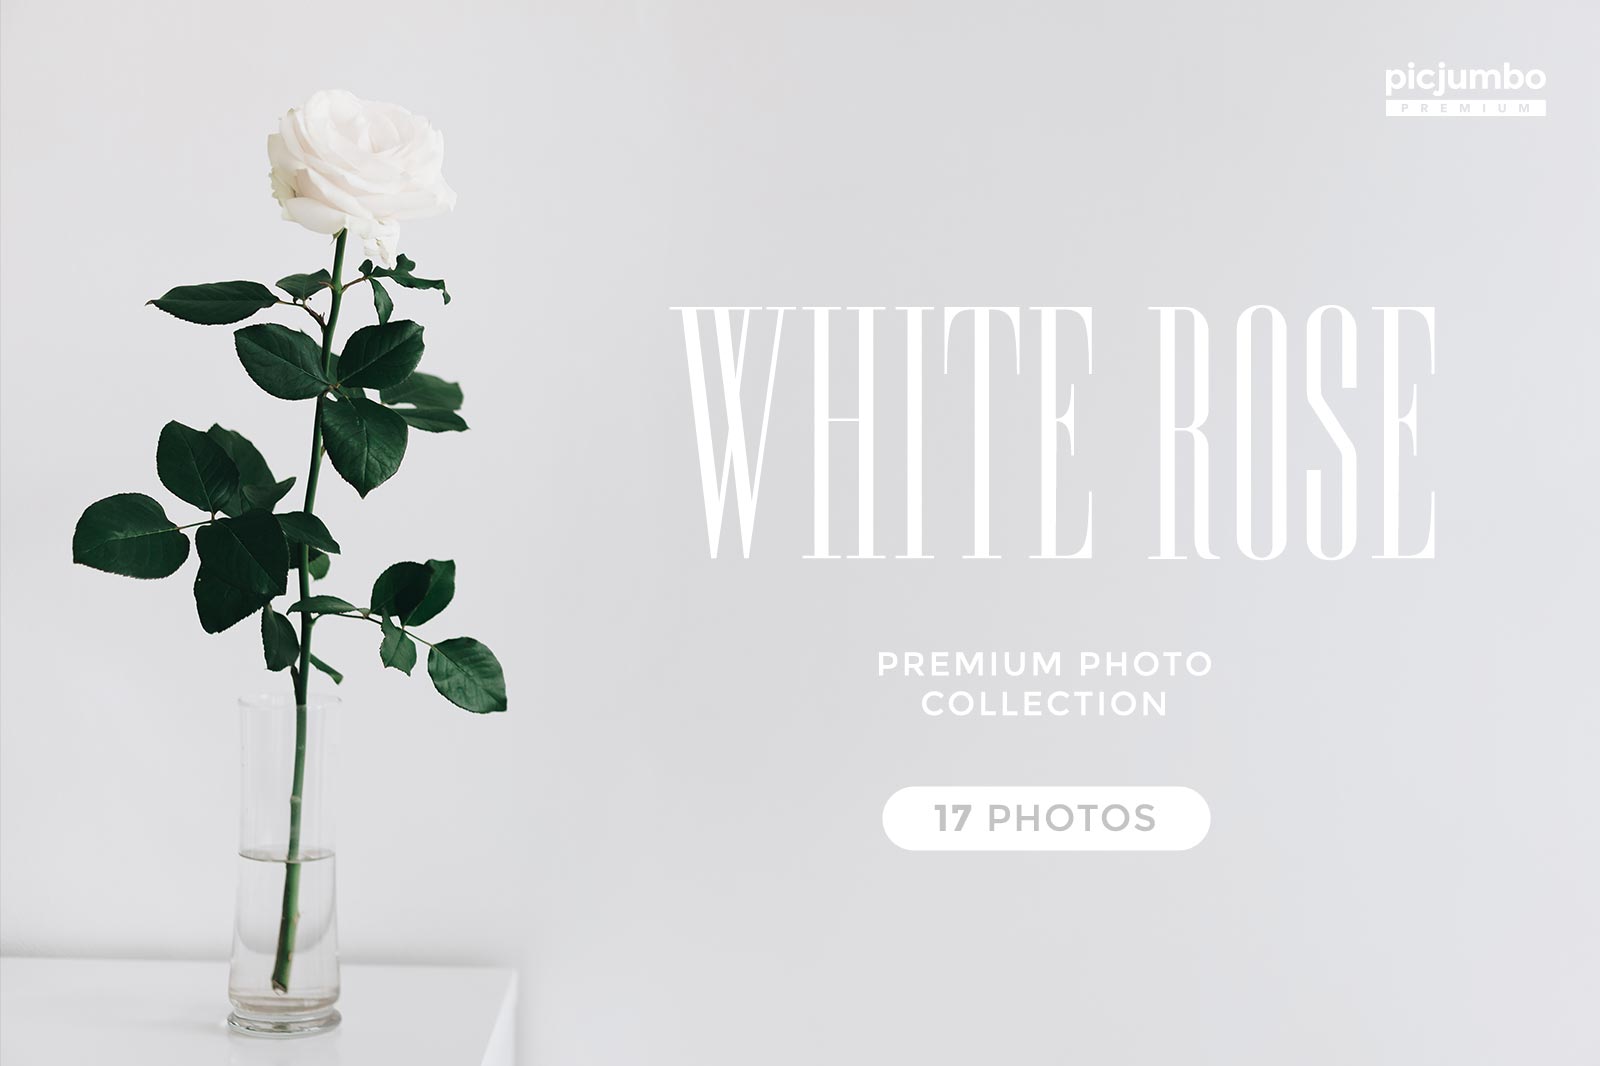 Download hi-res stock photos from our White Rose PREMIUM Collection!